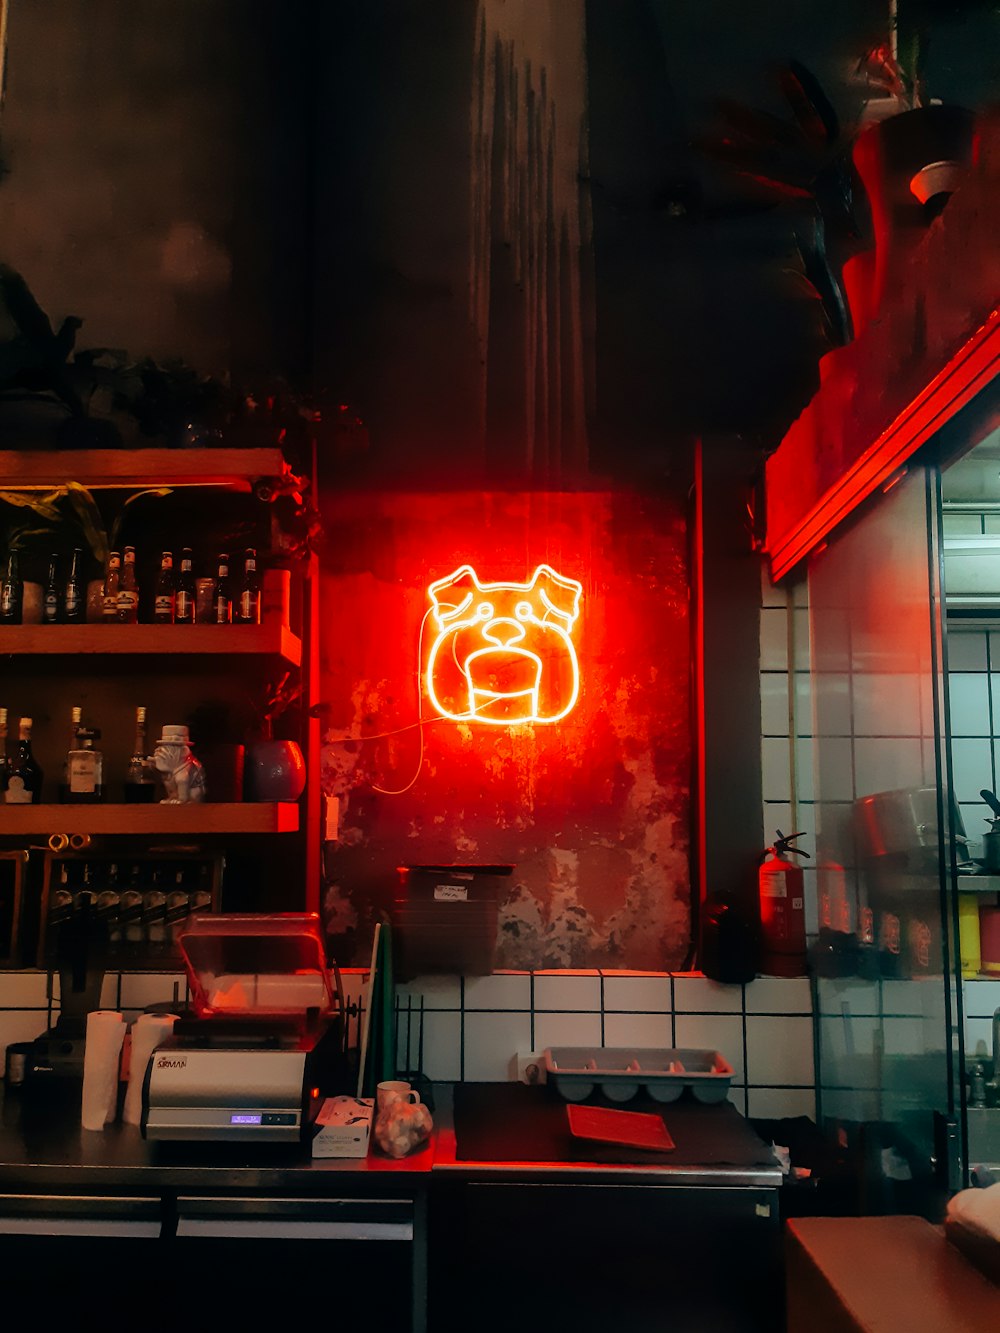 red and yellow bulldog LED light inside bar at night time